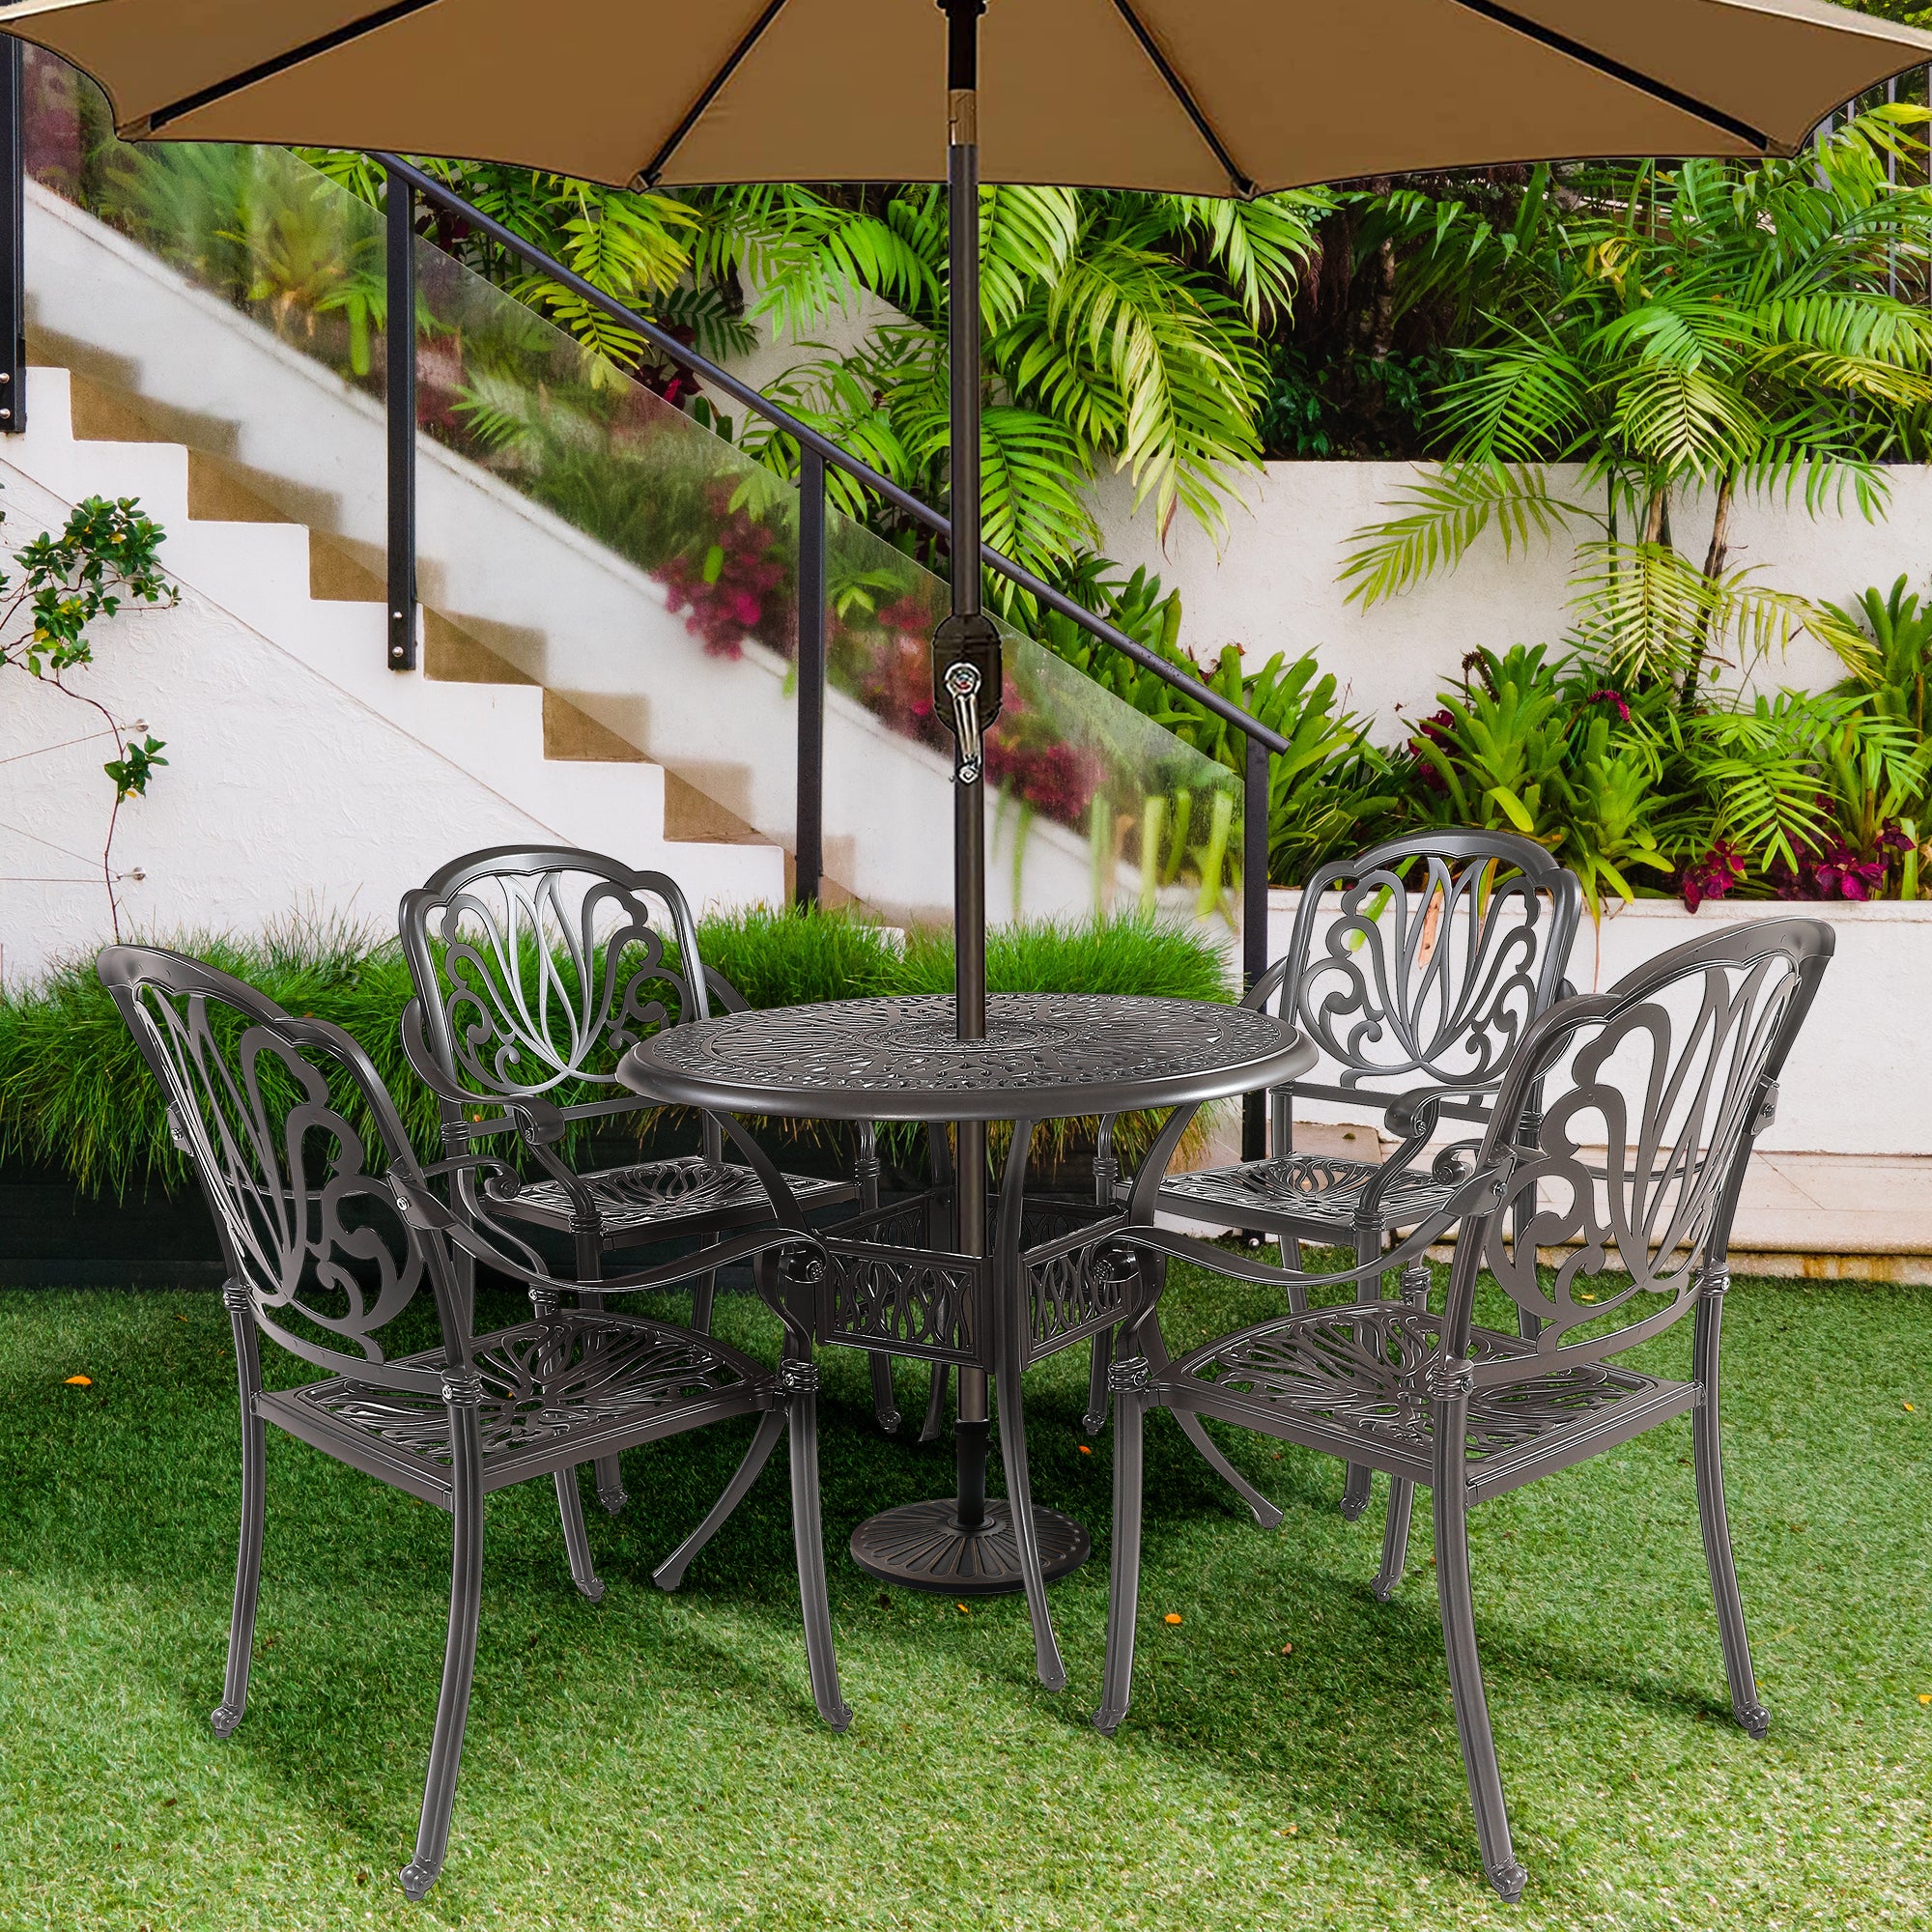 5PCS Outdoor Furniture Dining Table Set All-Weather Cast Aluminum Patio Furniture Includes 1 Round Table and 4 Chairs with Umbrella Hole for Patio Garden Deck, Lattice Weave Design,BLACK COLOR